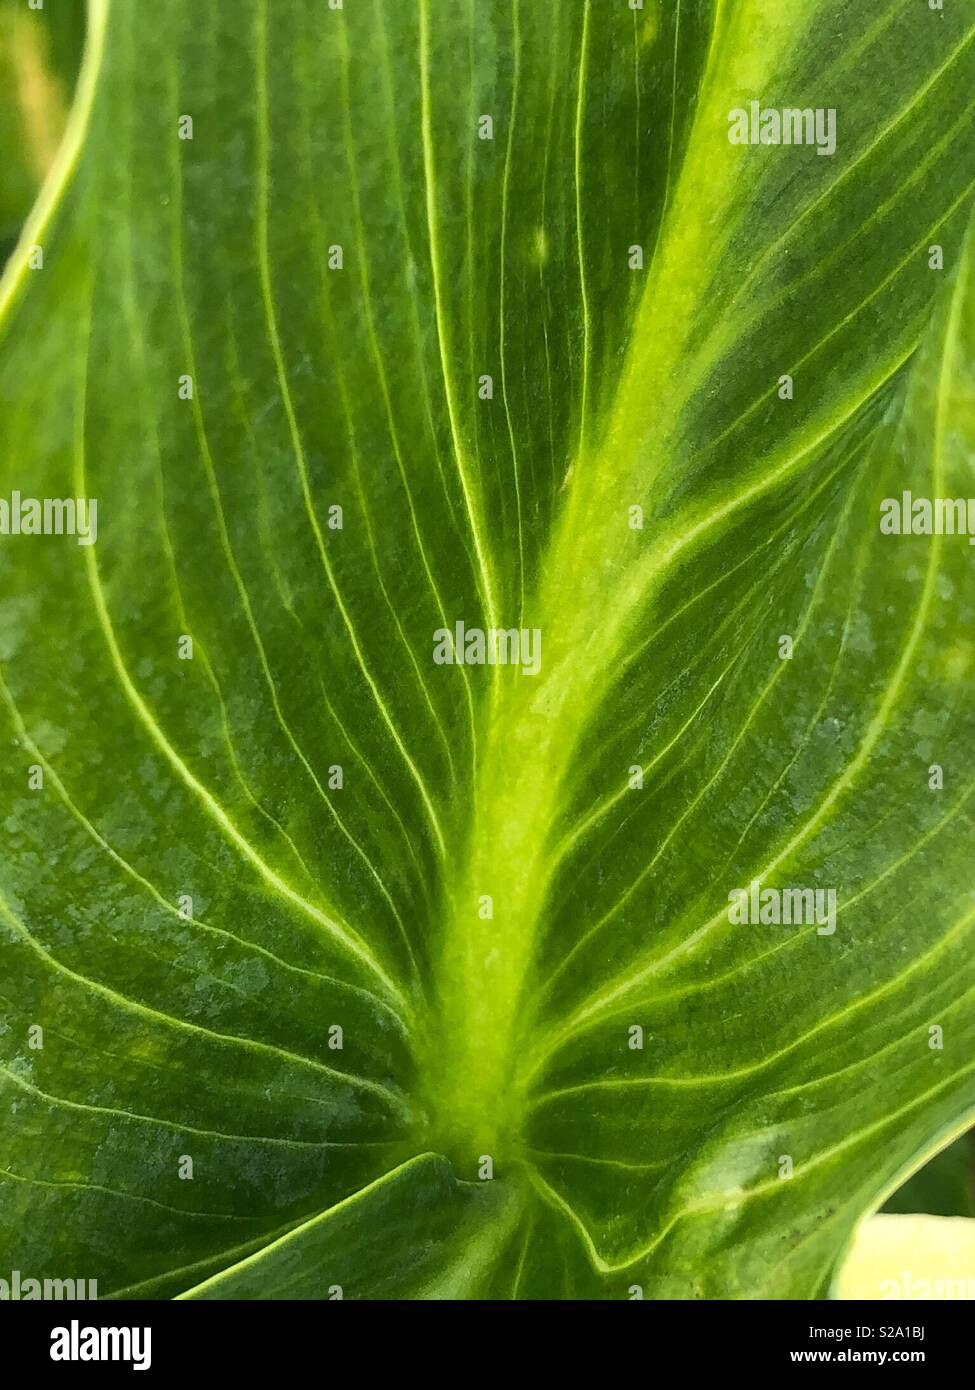 Fresh green leaf close up showing veins Stock Photo